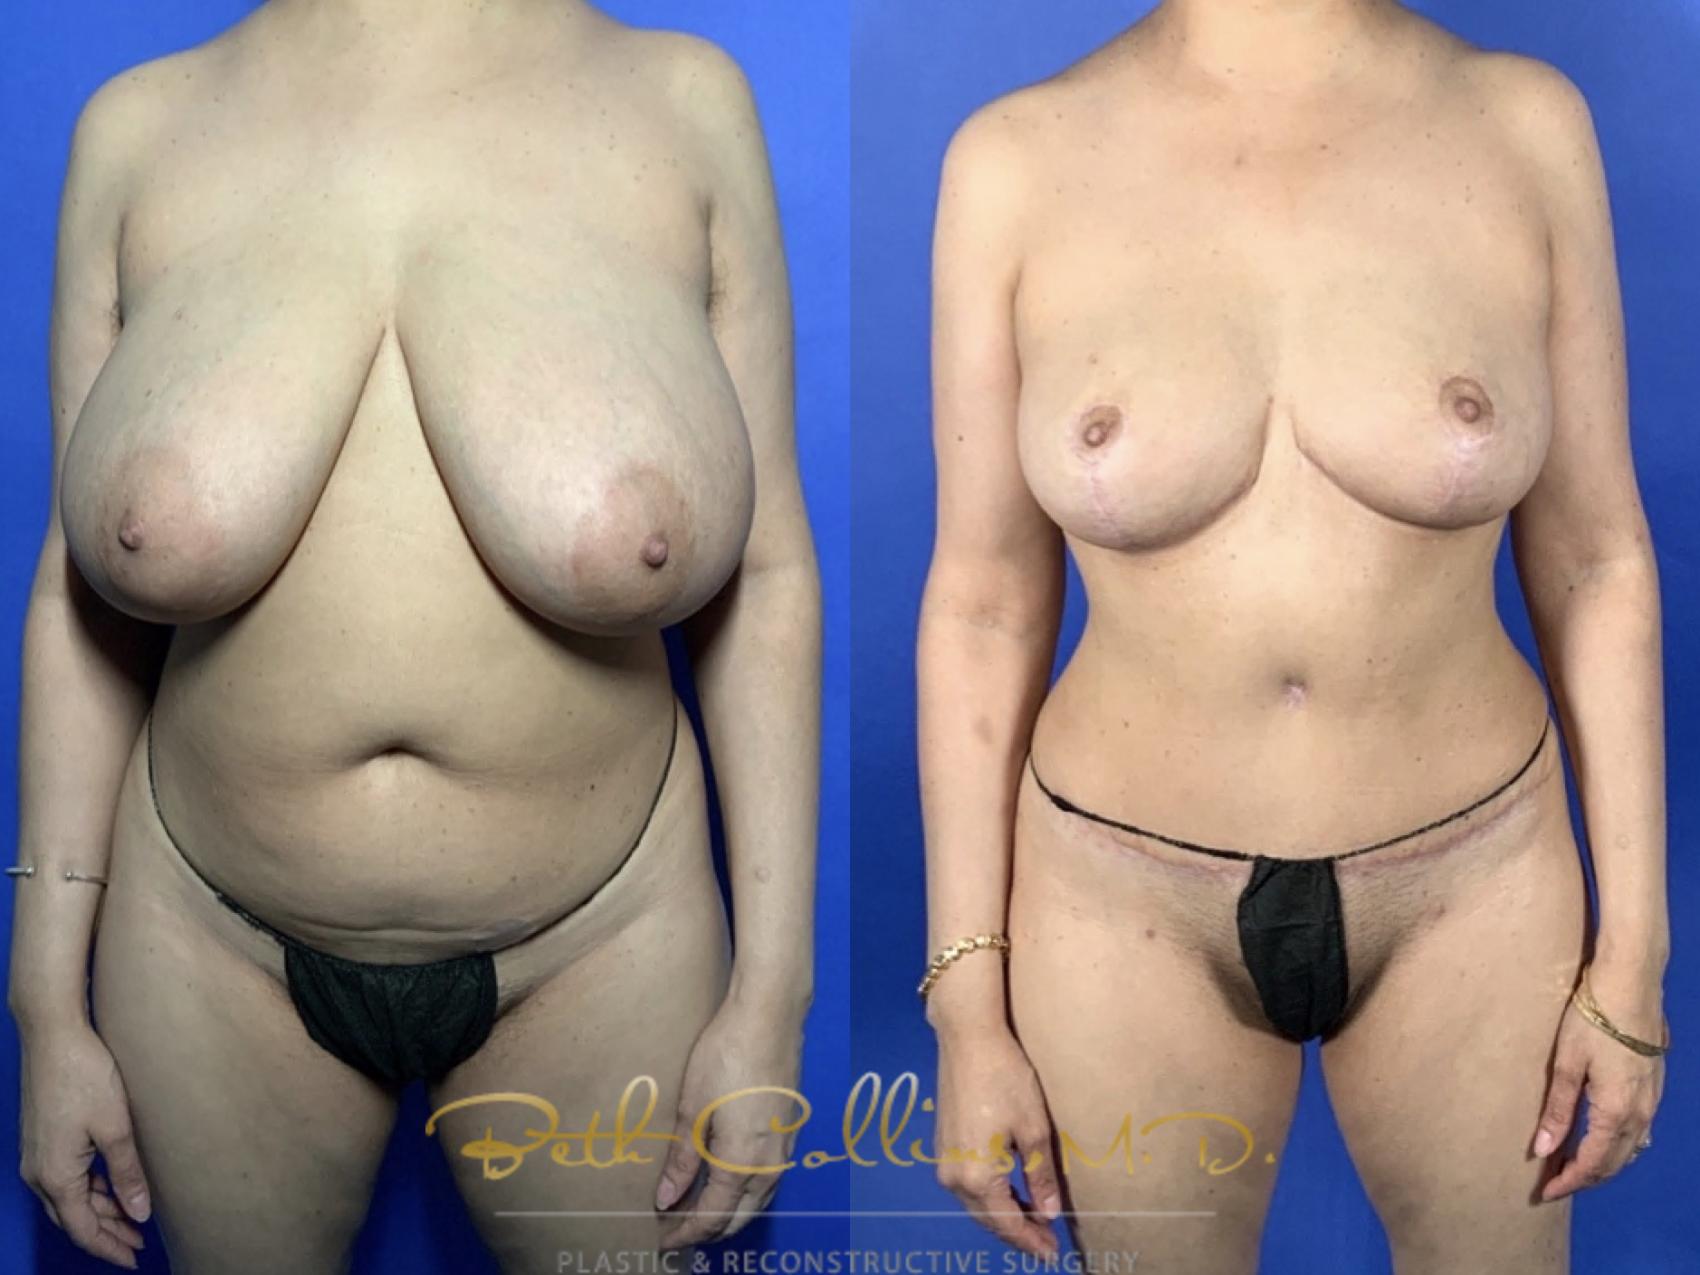 Body Contouring: This petite lady was bothered by her large breasts and excess fat in her abdomen and trunk. She had a bilateral breast reduction and abdominoplasty with 360 degree liposuction. This narrowed her waist, slimmed her back and flattened her abdomen while reducing the size of her breasts and lifting them at the same time.